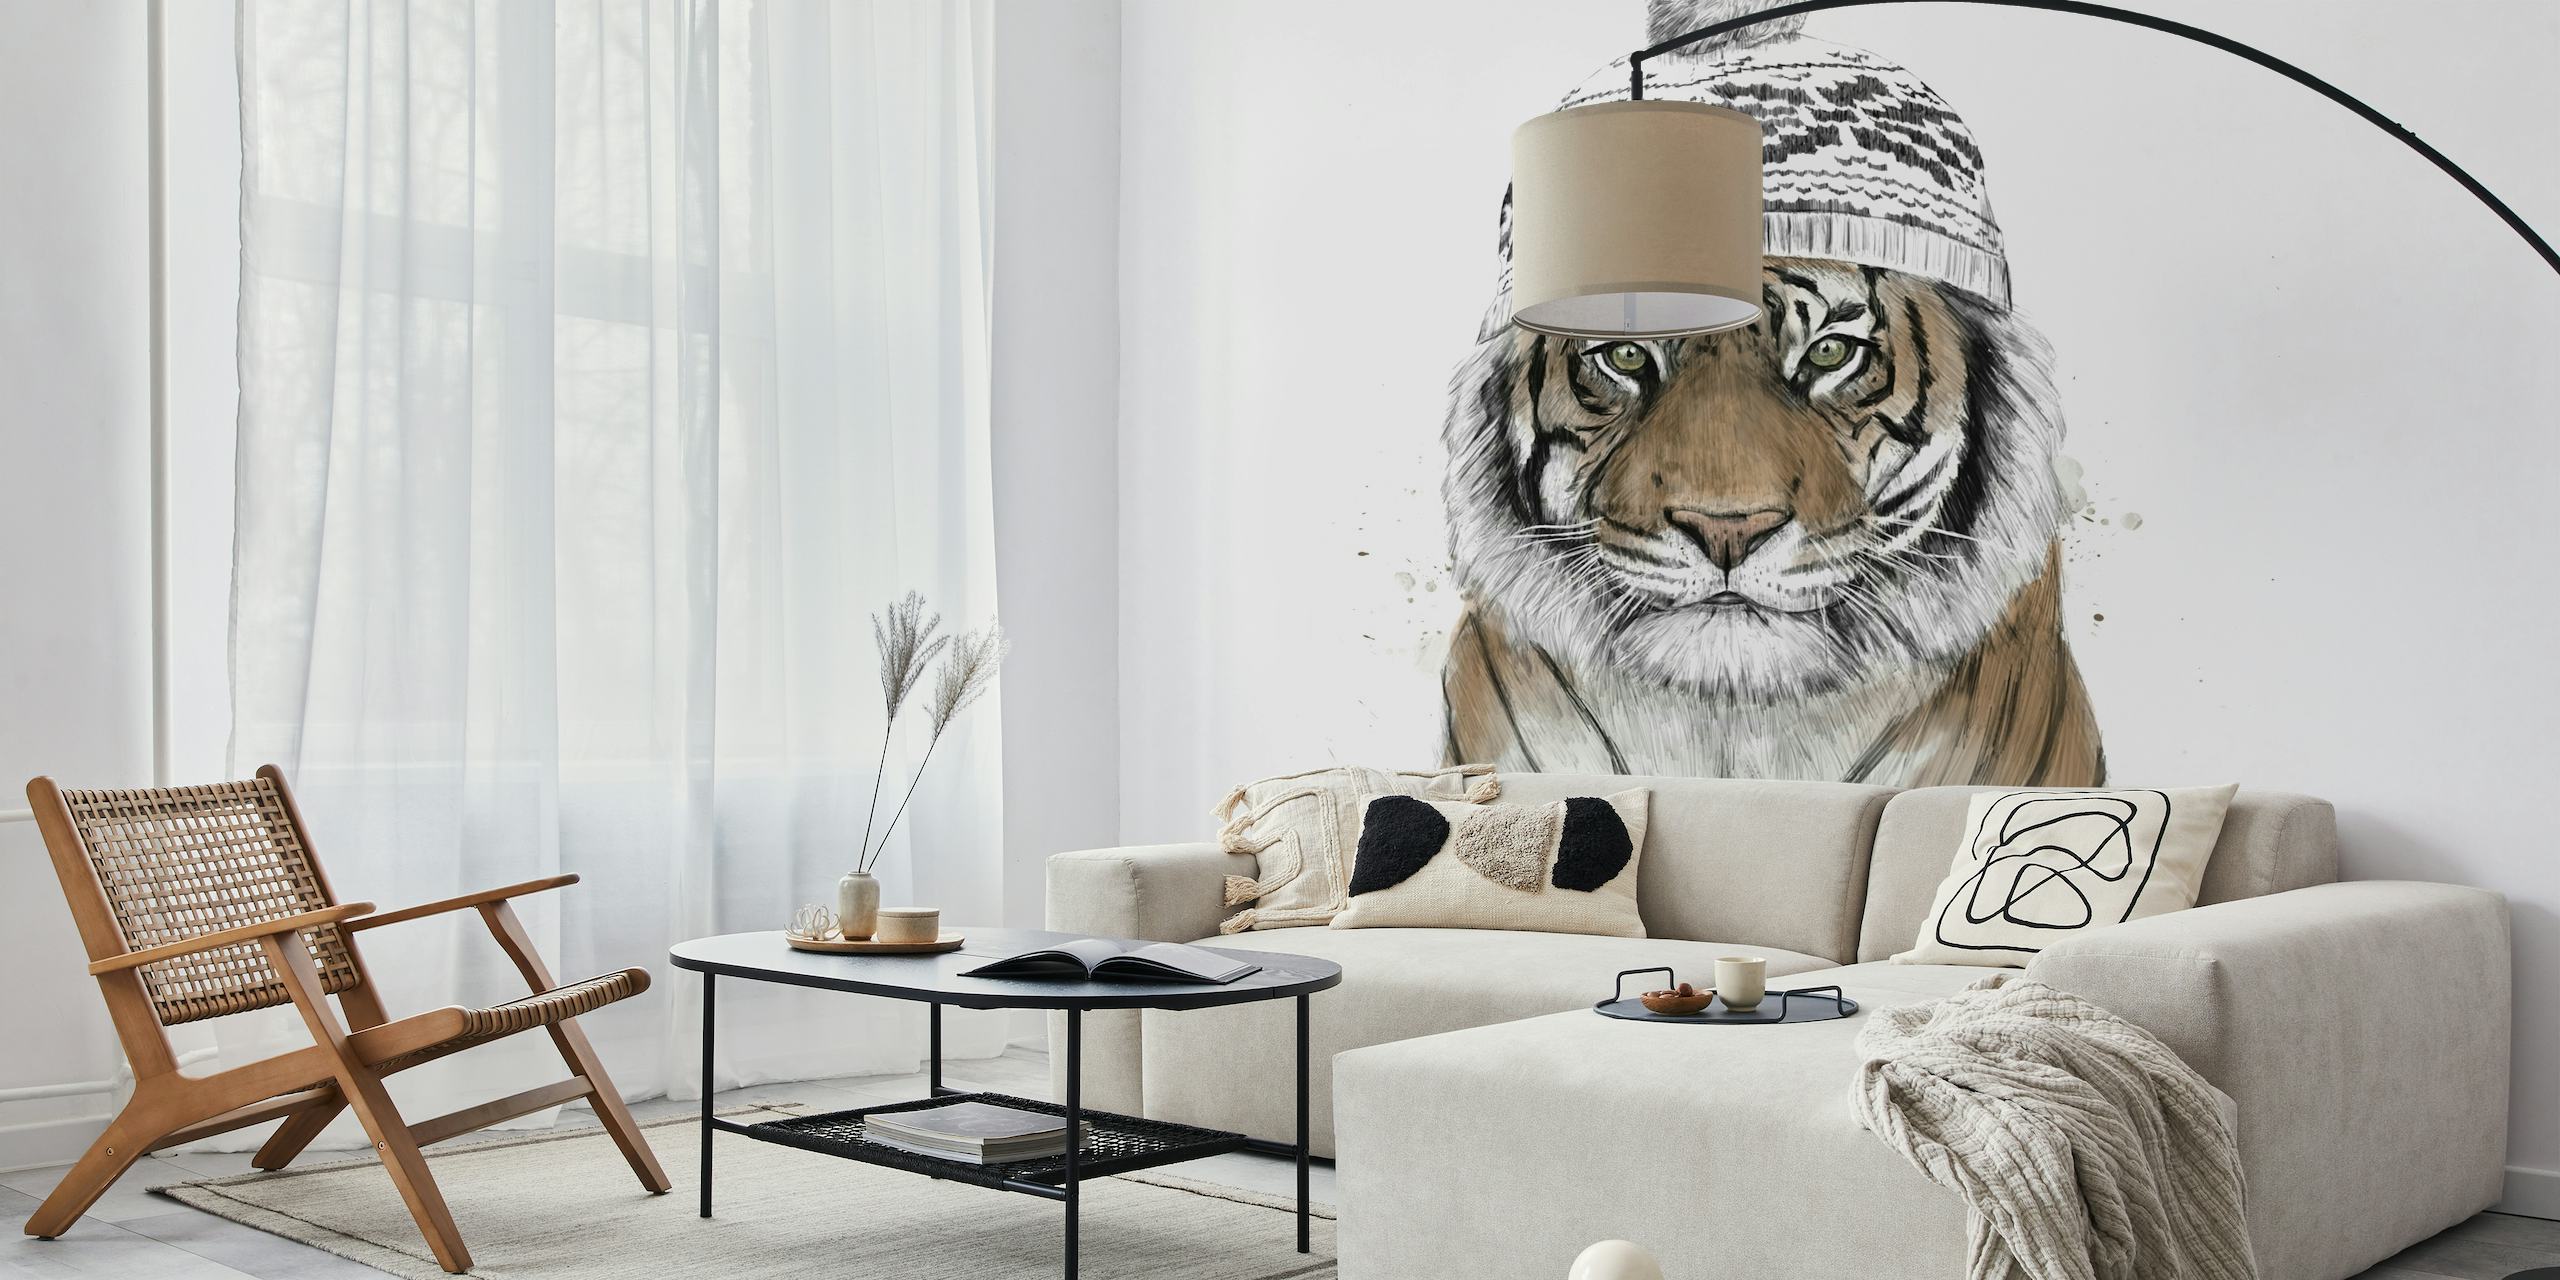 Siberian tiger wall mural featuring a detailed illustration of a tiger's face on a white background